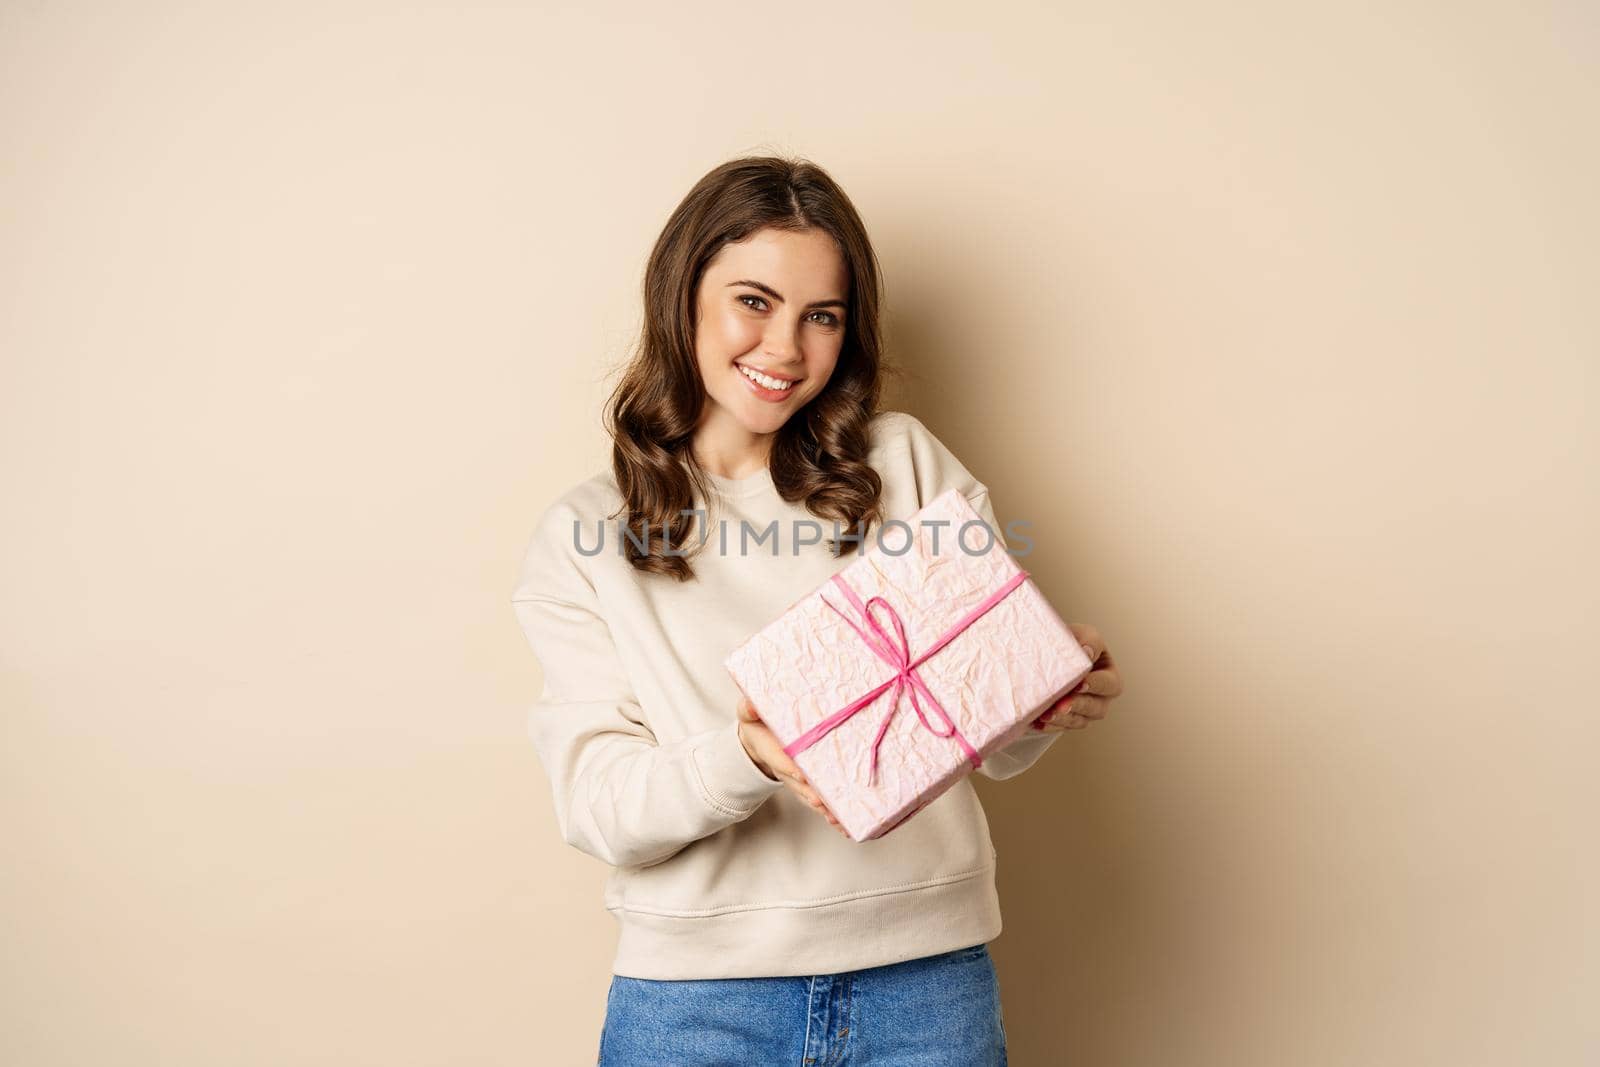 Beautiful girl posing with gift and smiling, showing wrapped present box, standing in sweater over beige background. concept of holidays.